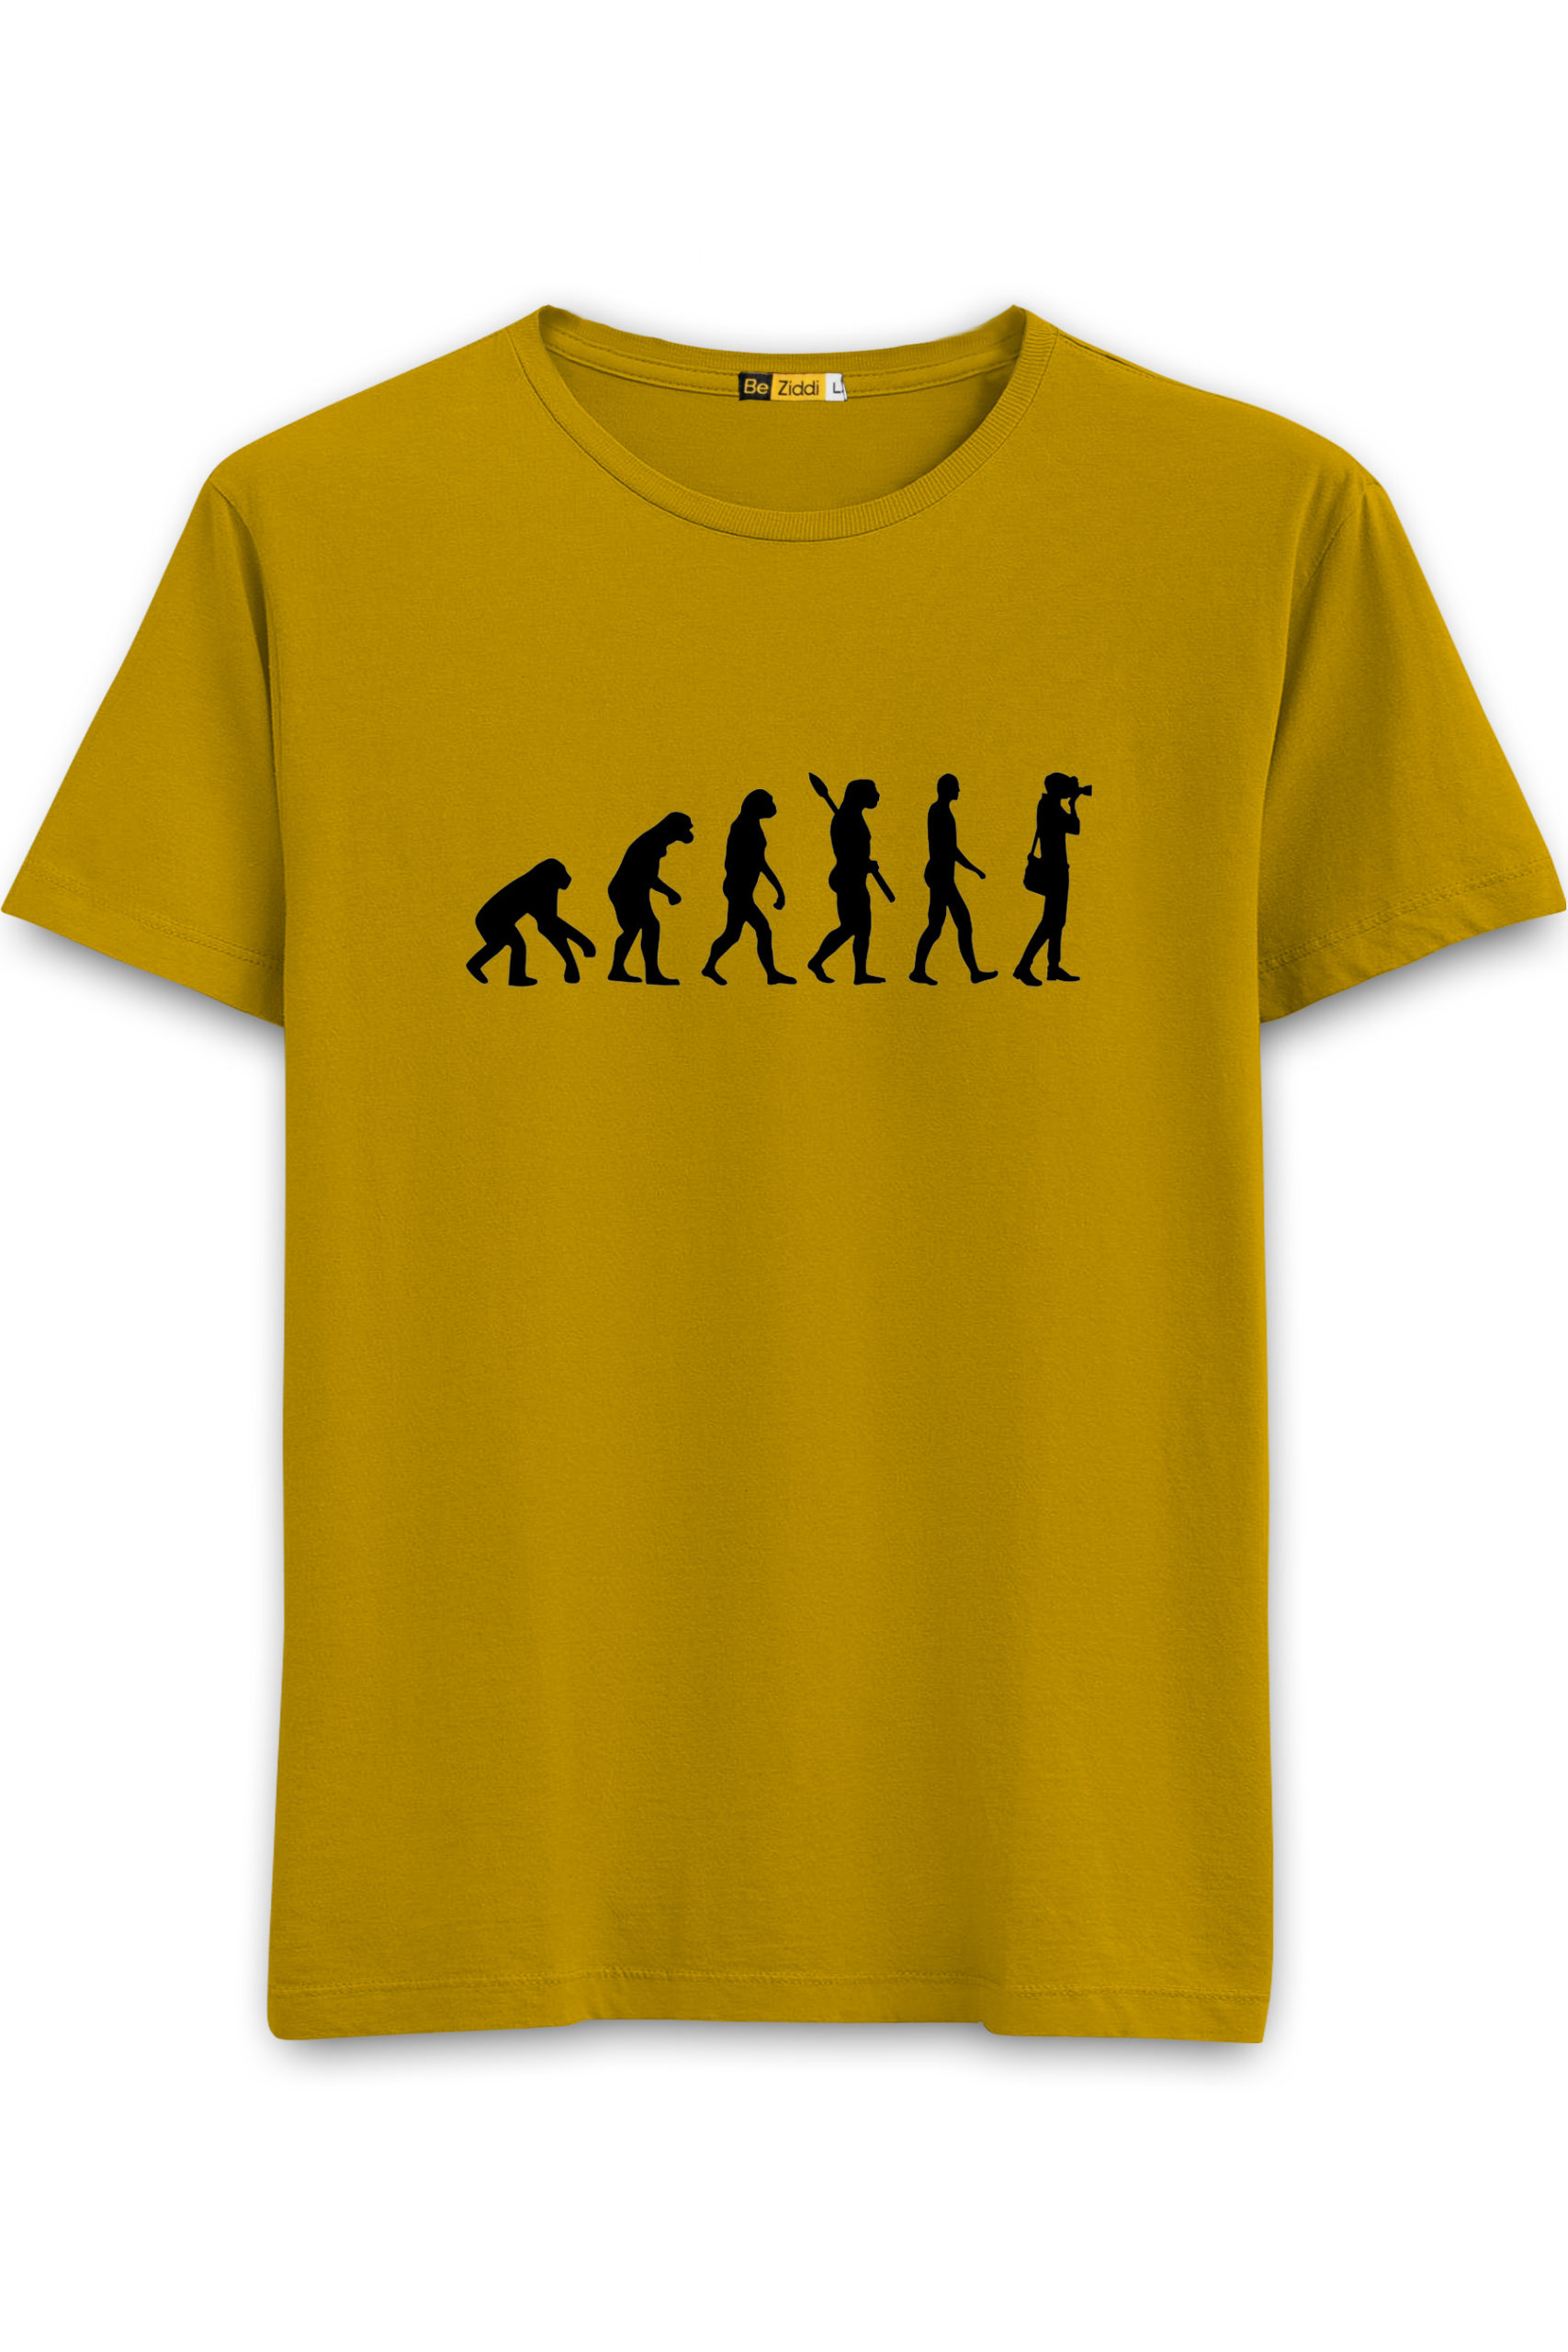 Buy Photography T-shirts Online In India, Shop Photographer T-shirts